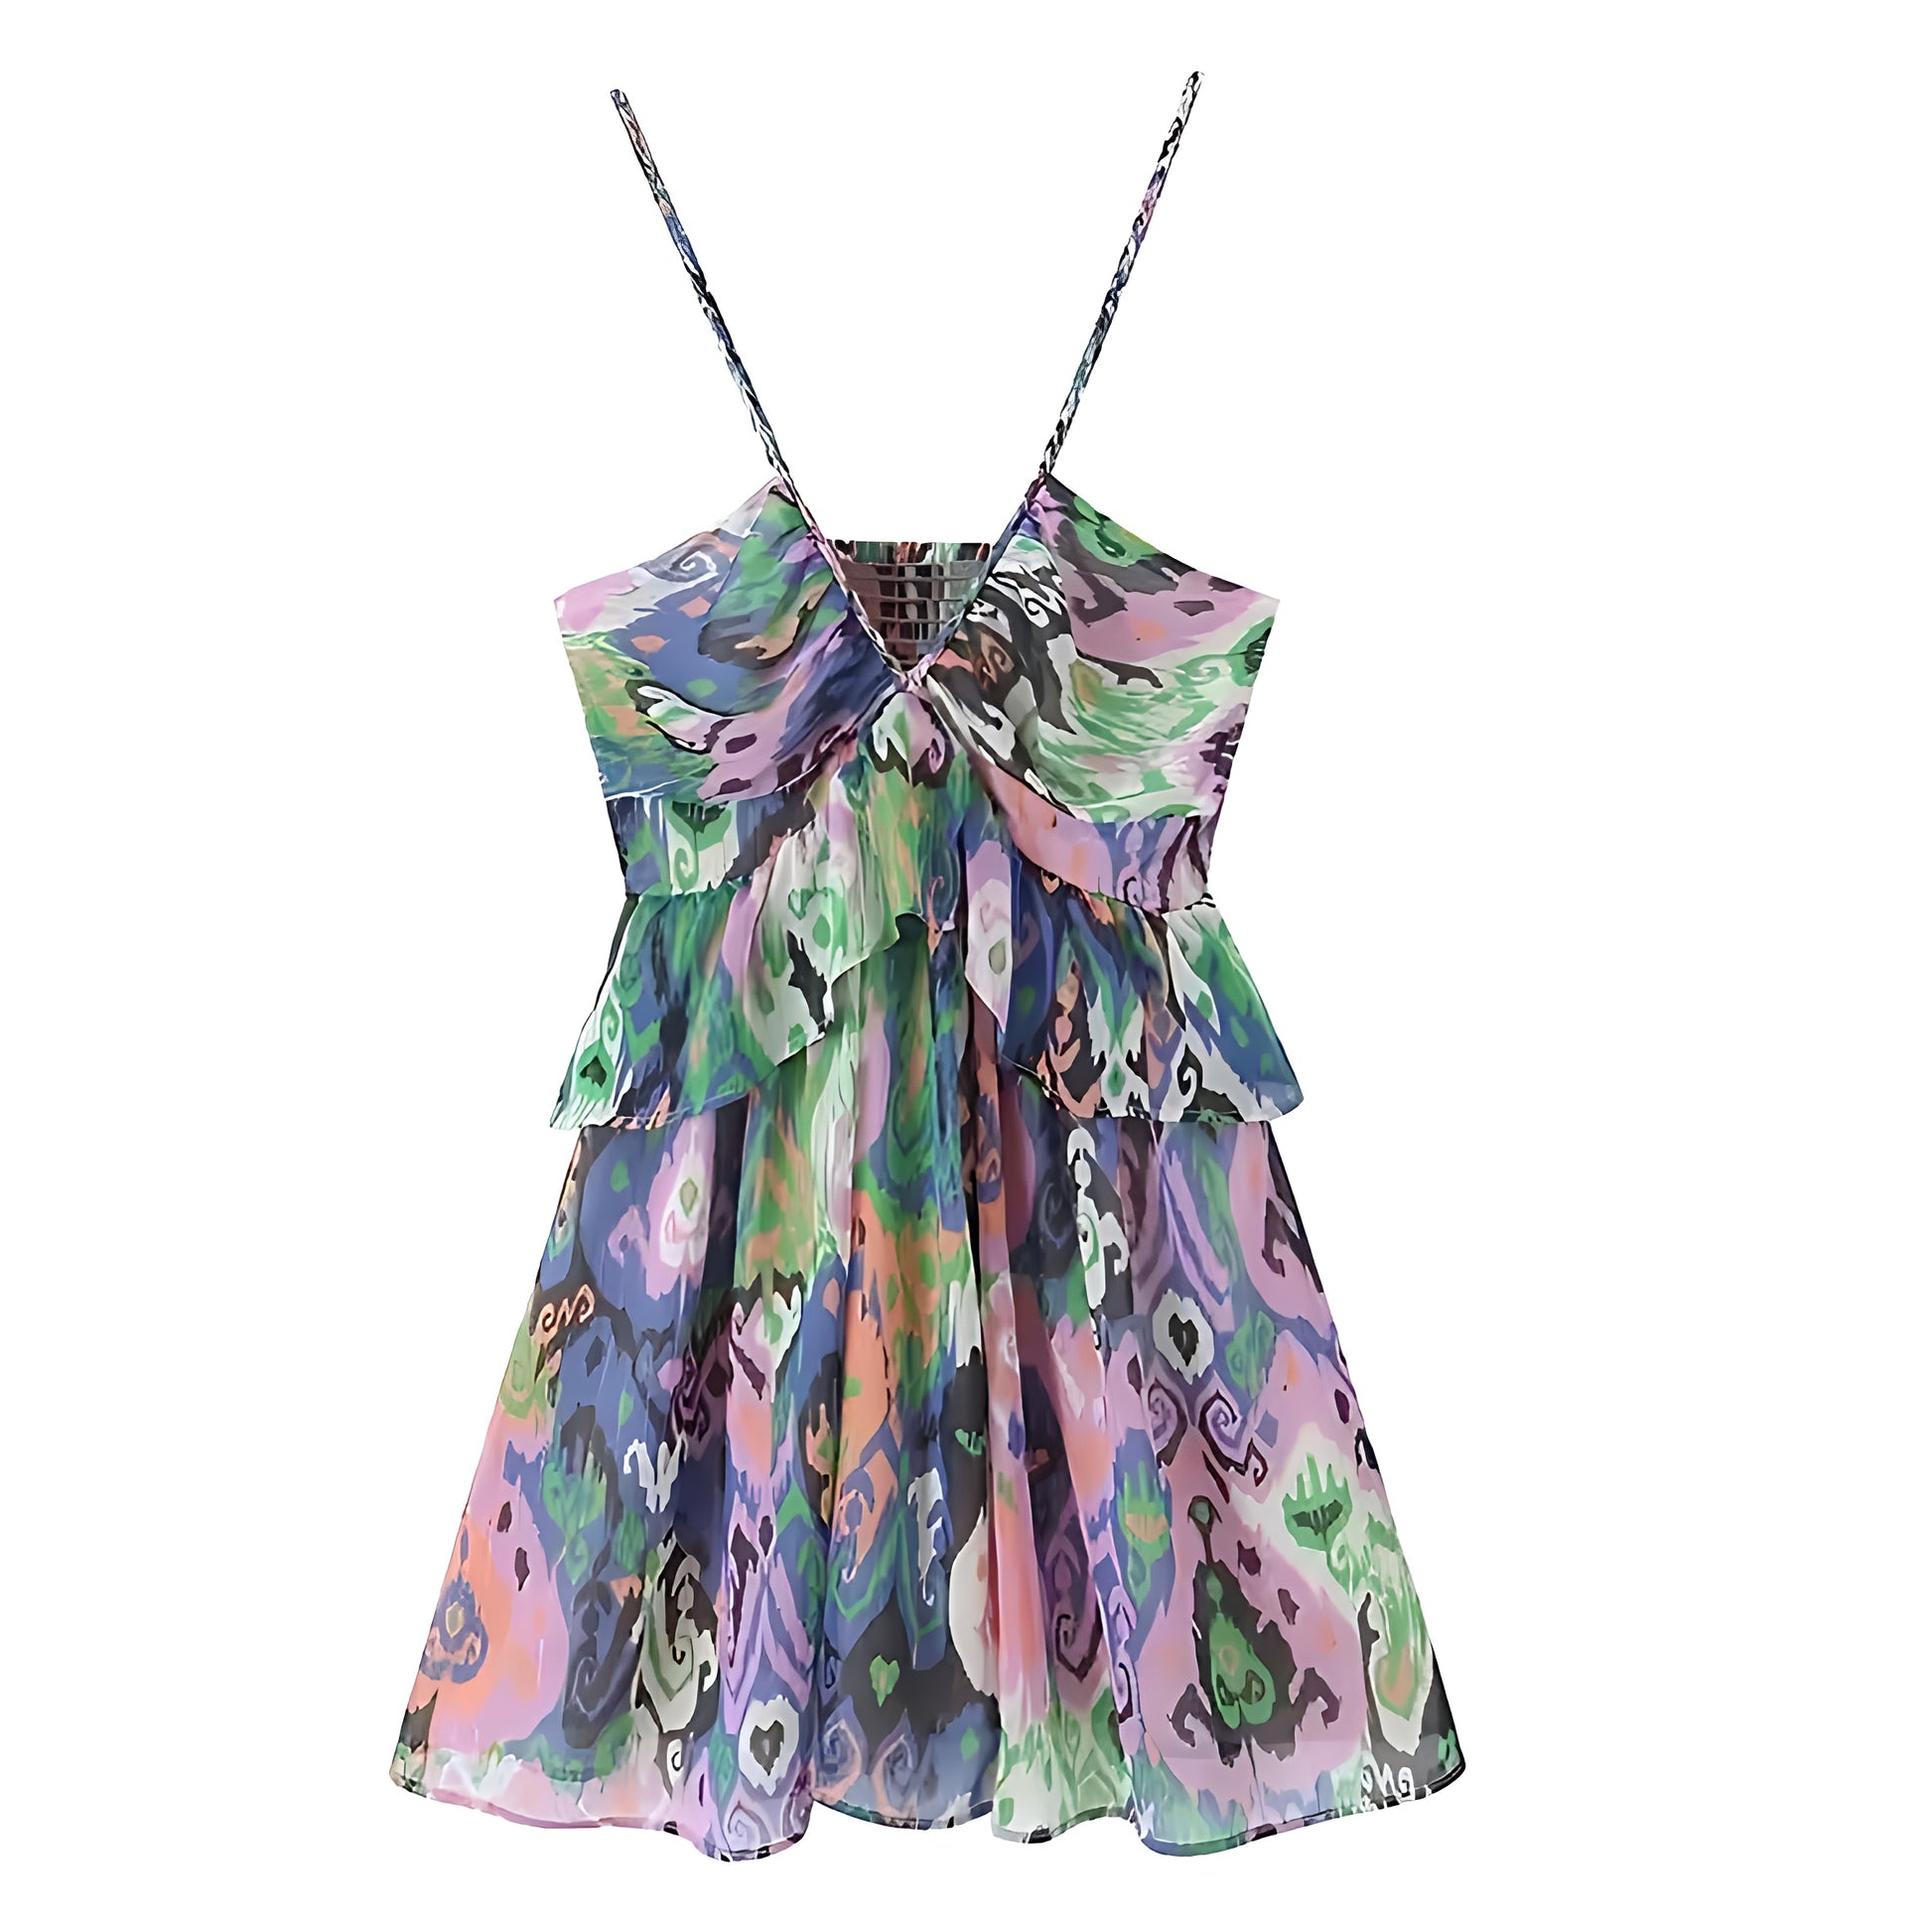 blue-purple-green-pink-orange-multi-color-tie-dye-patterned-slim-layered-ruffle-trim-fit-and-flare-drop-waist-v-neck-spaghetti-strap-sleeveless-backless-open-back-halter-flowy-tiered-boho-bohemian-babydoll-short-mini-dress-women-ladies-teens-tweens-chic-trendy-spring-2024-summer-casual-semi-formal-feminine-preppy-style-party-prom-homecoming-hoco-dance-club-wear-tropical-european-ibizia-vacation-beach-wear-sundress-revolve-zara-altard-state-whitefox-urban-outfitters-pacsun-free-people-dupe